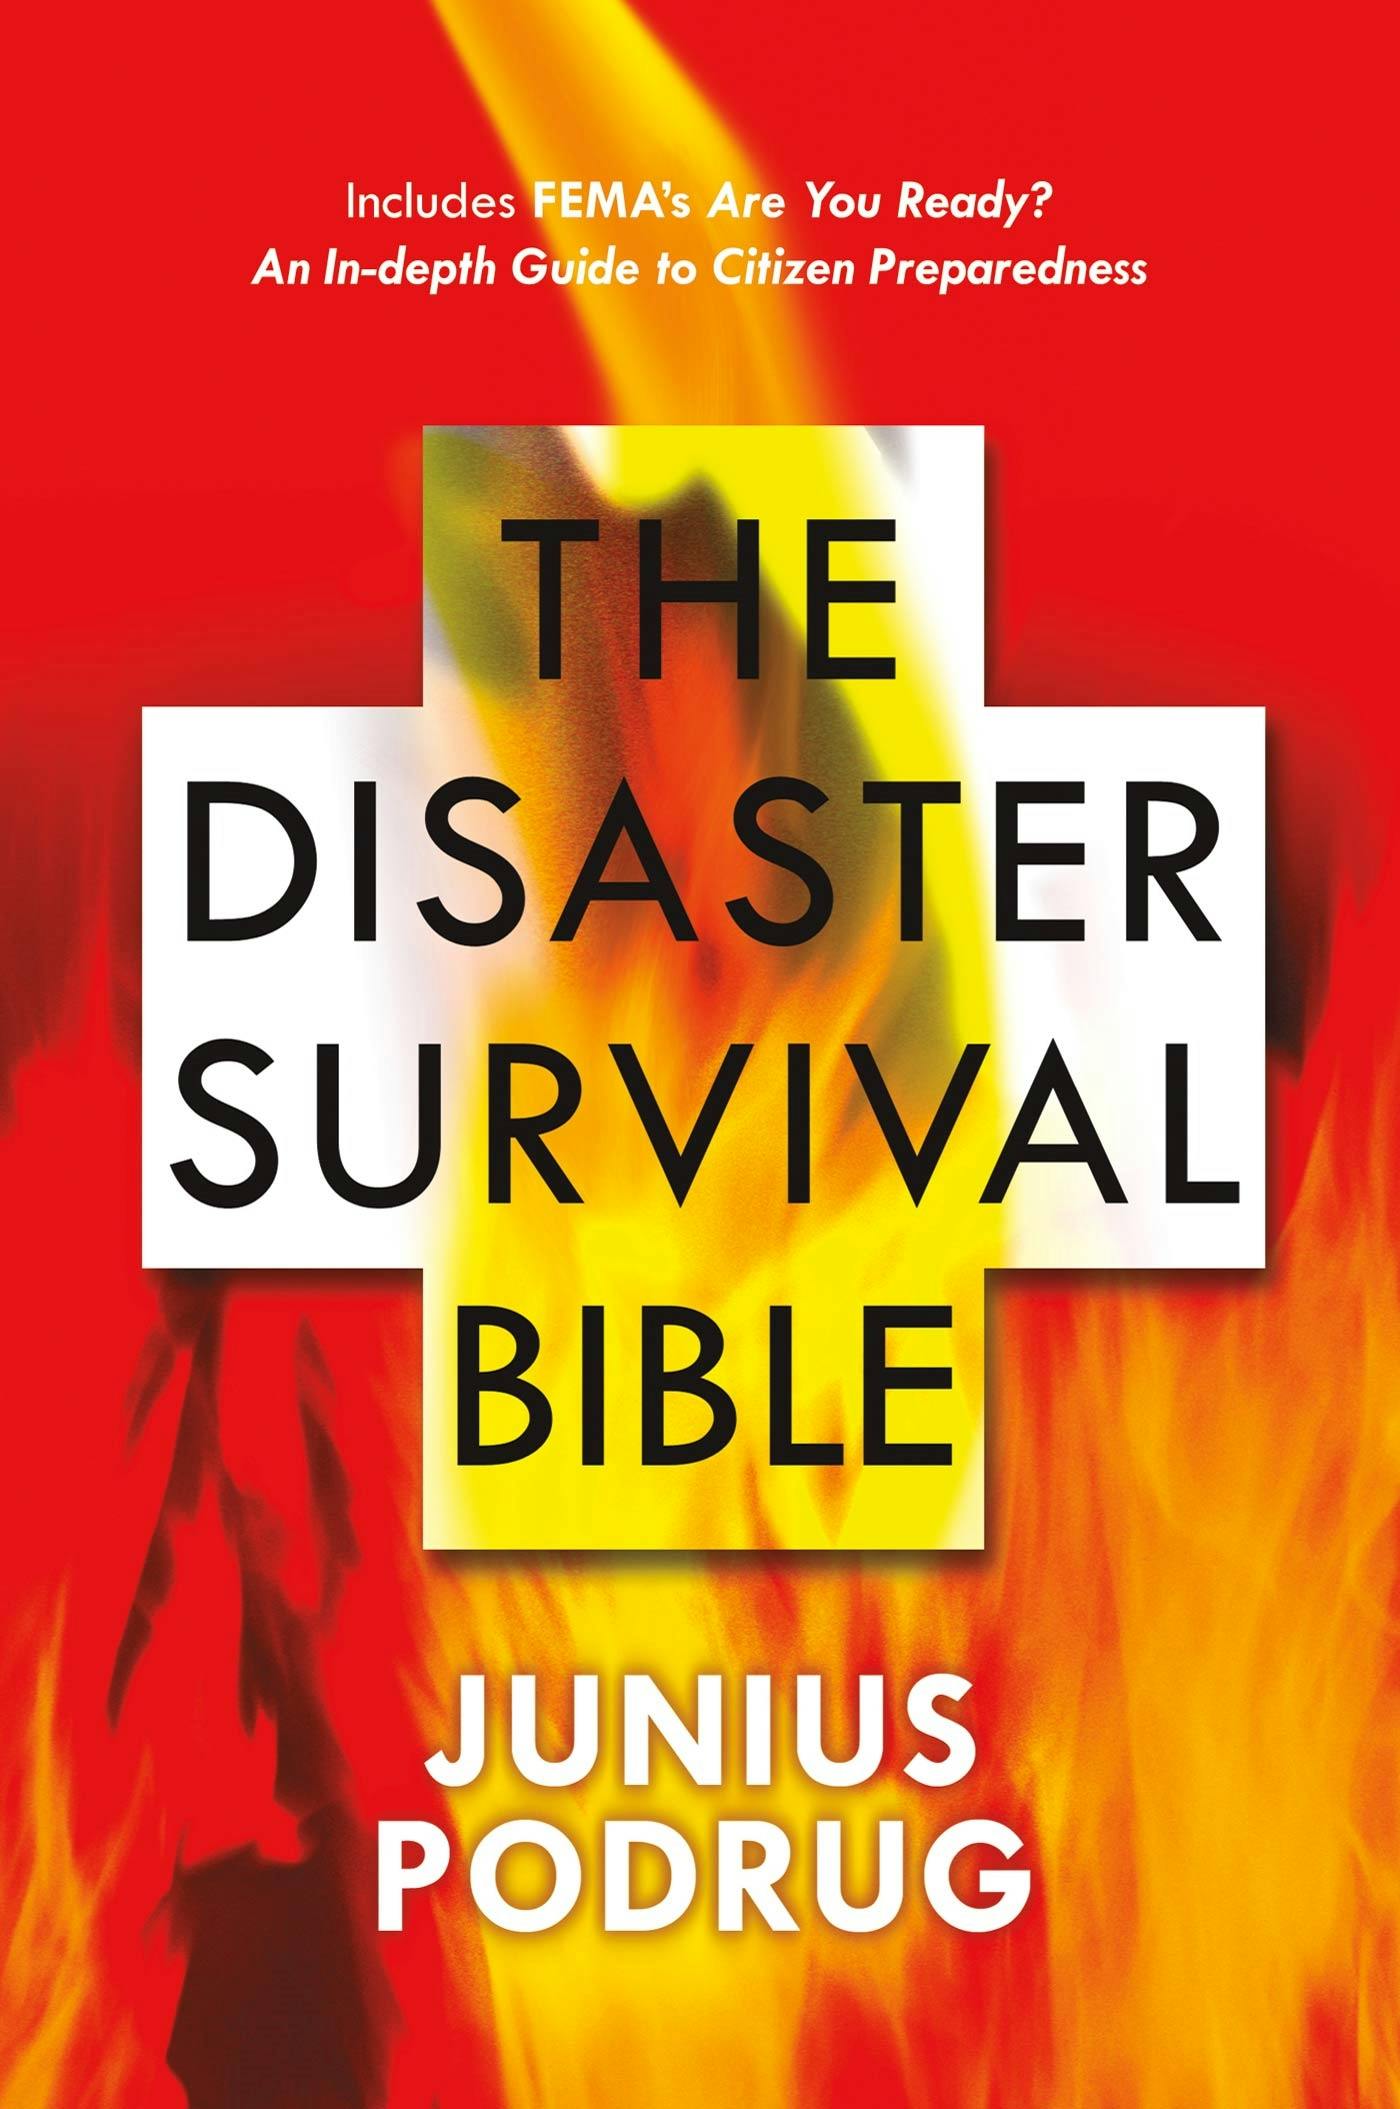 Cover for the book titled as: The Disaster Survival Bible